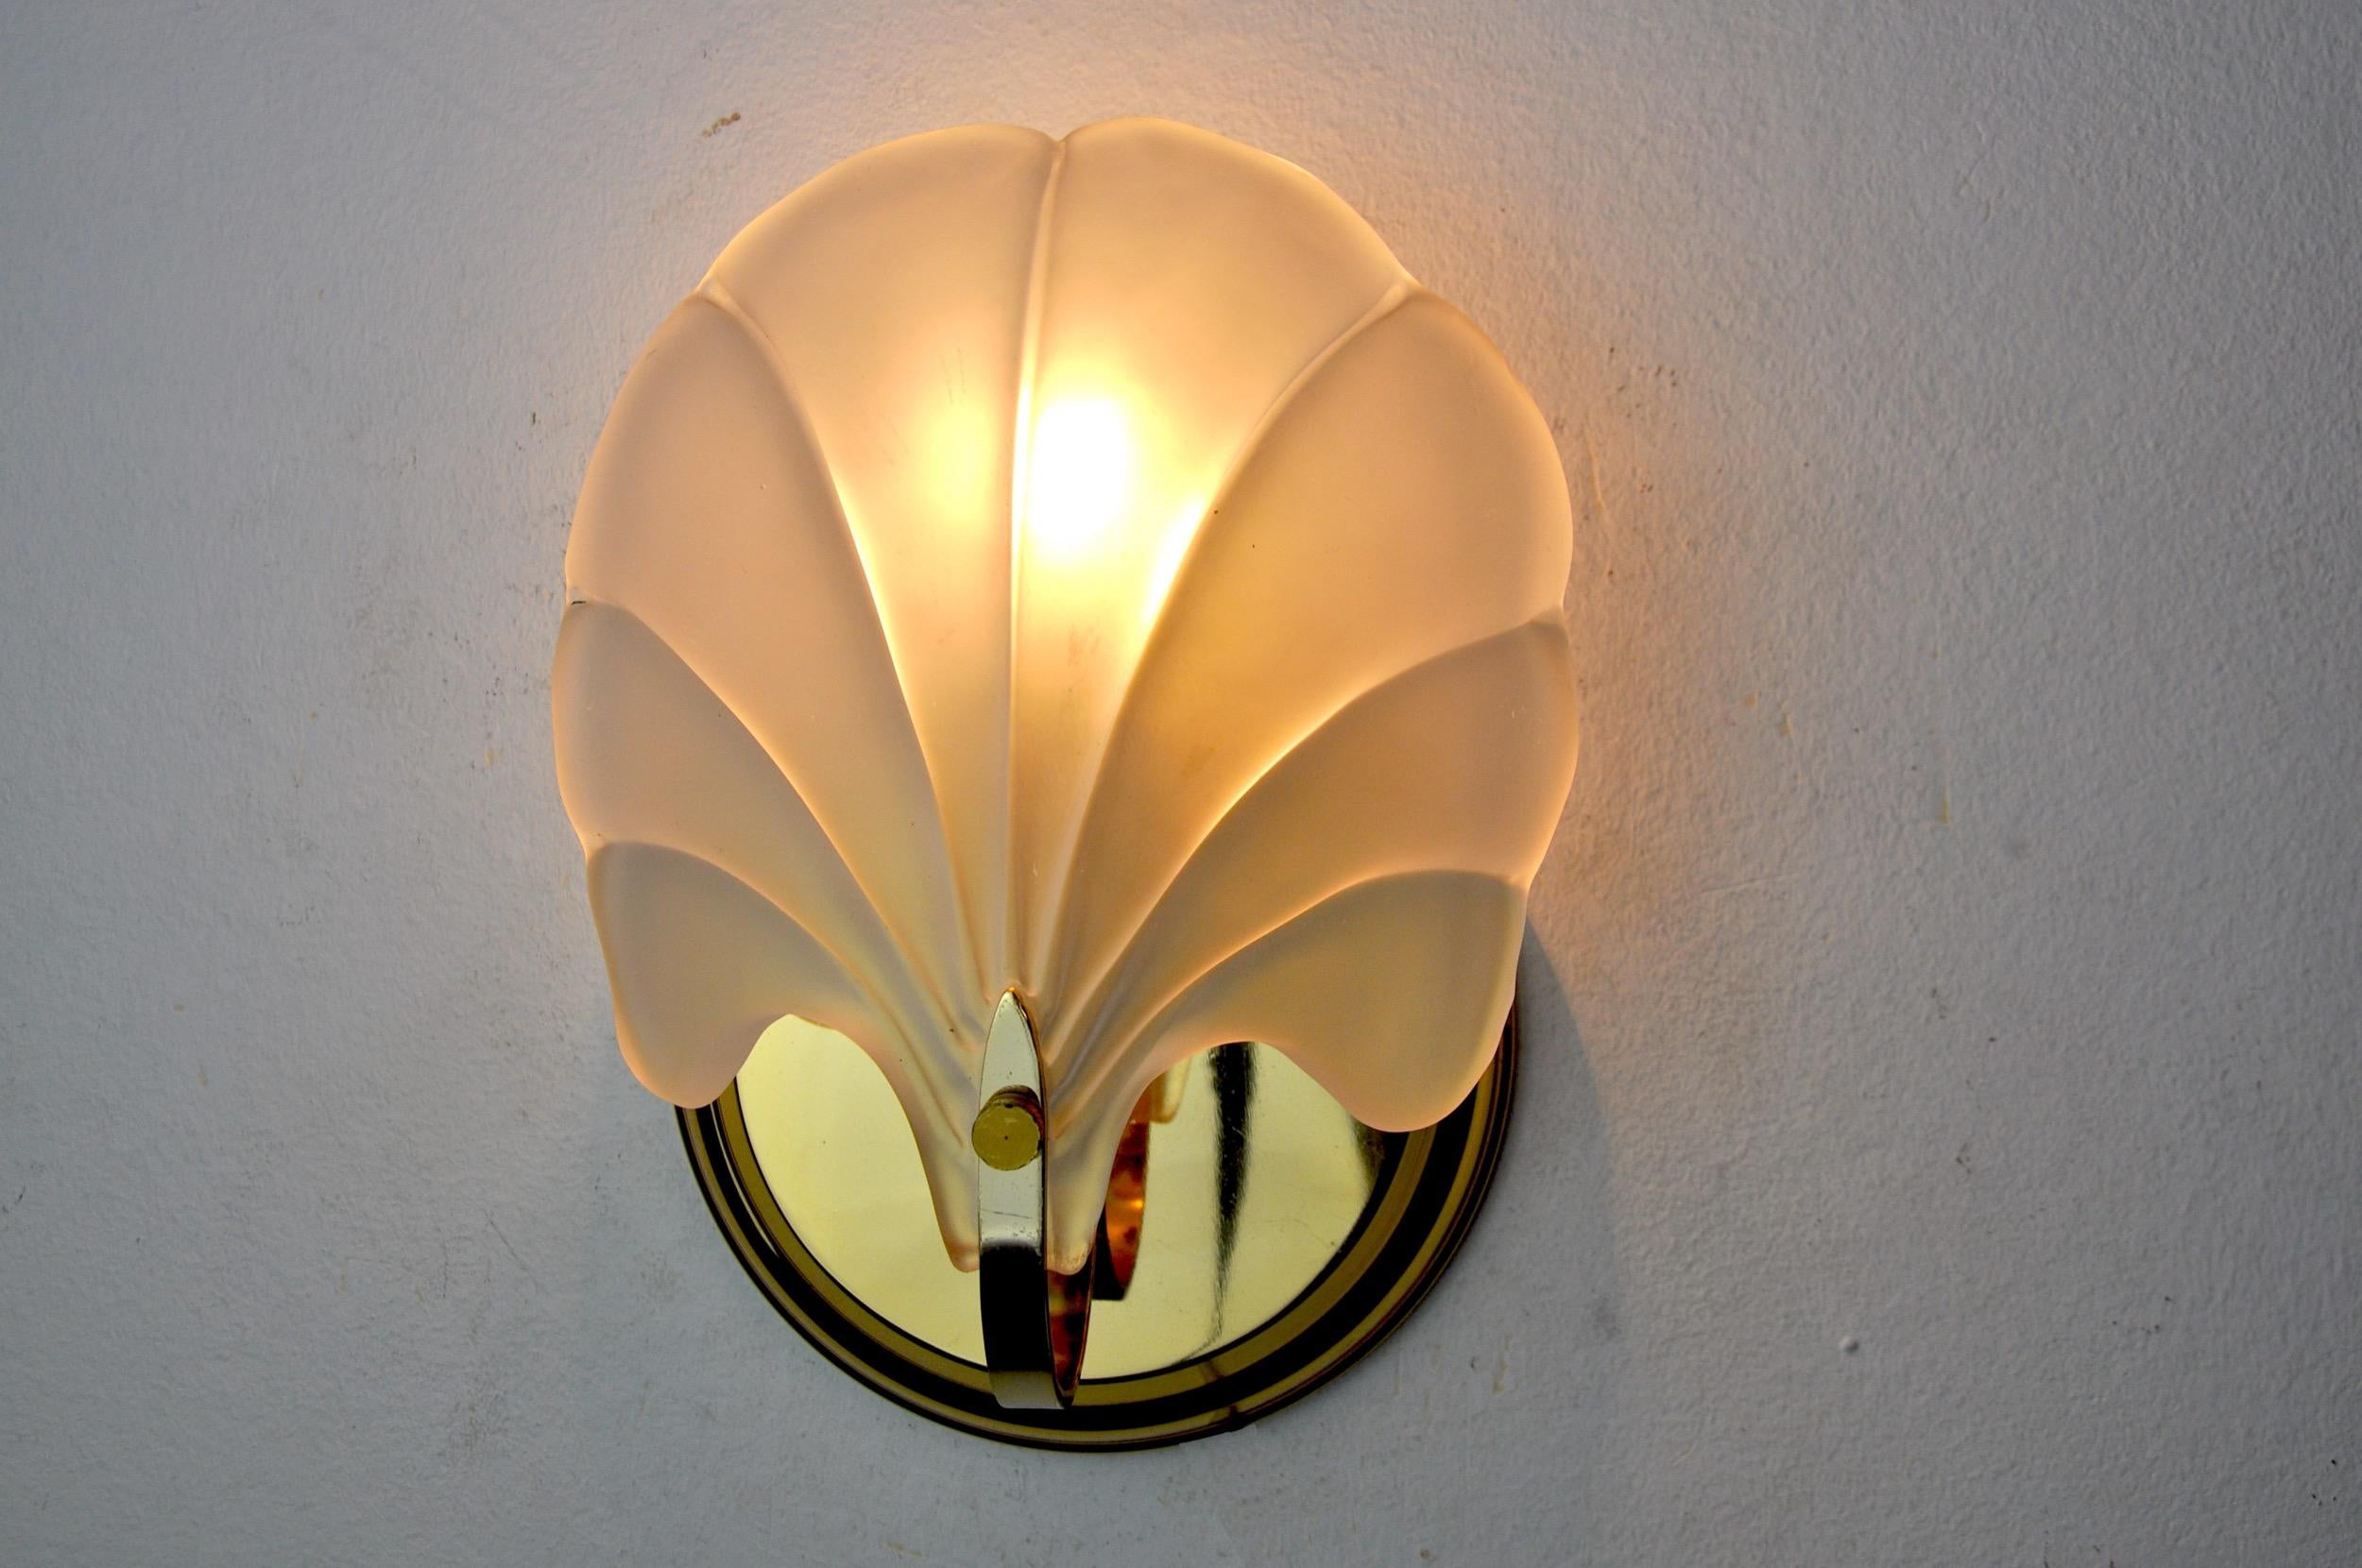 Beautiful shell wall lamp designed and produced in Italy in the 1980s.
Design wall lamp in the shape of a glass shell supported by a gilded metal structure.
Unique object that will illuminate wonderfully and bring a real design touch to your